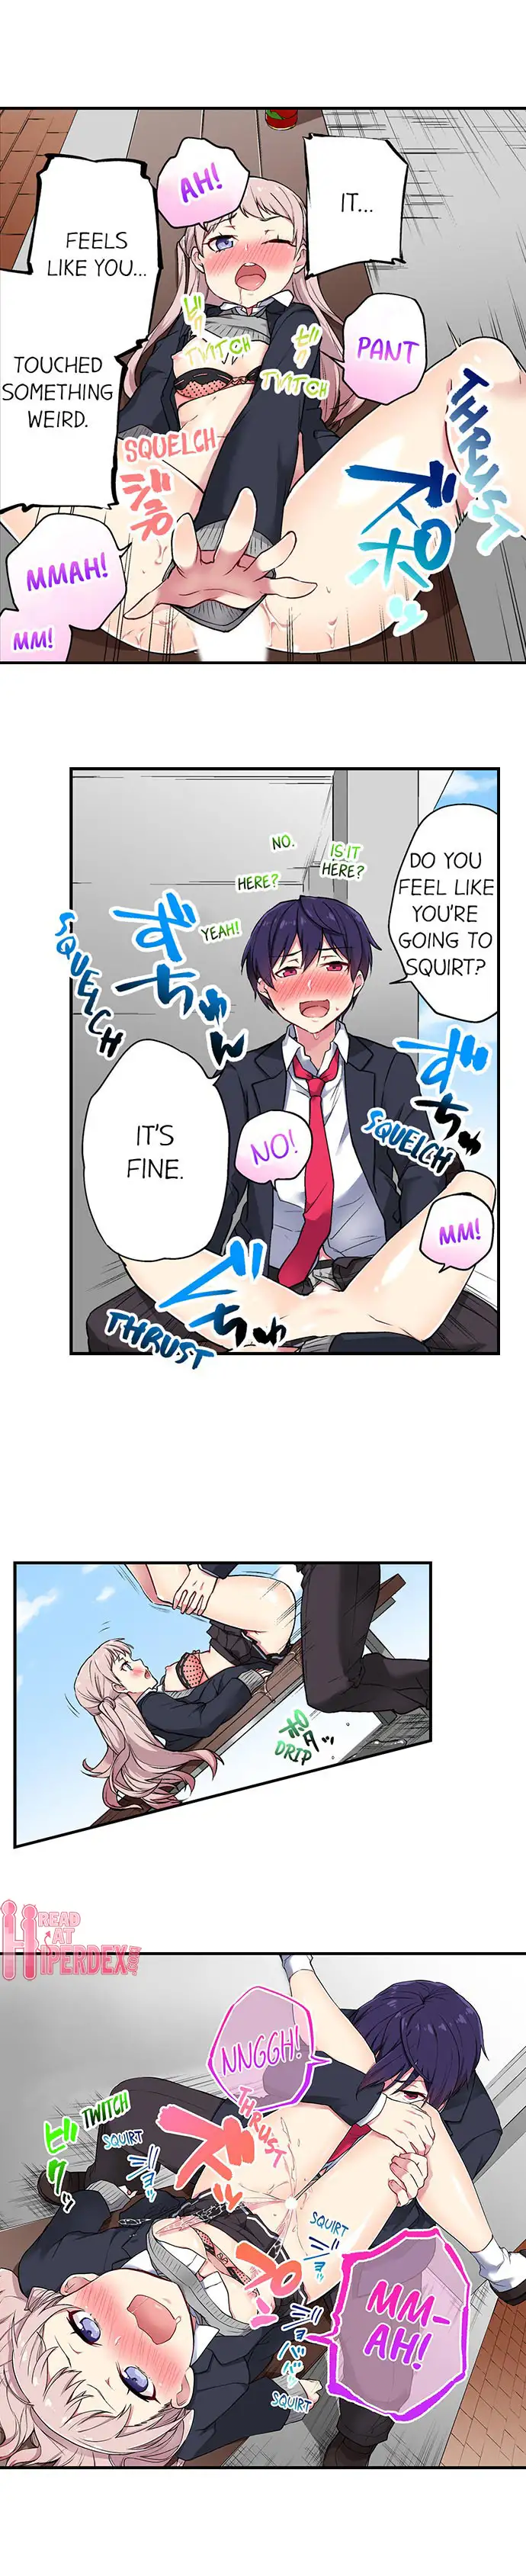 Committee Chairman, Didn’t You Just Masturbate In the Bathroom? I Can See the Number of Times People Orgasm - Chapter 33 Page 3